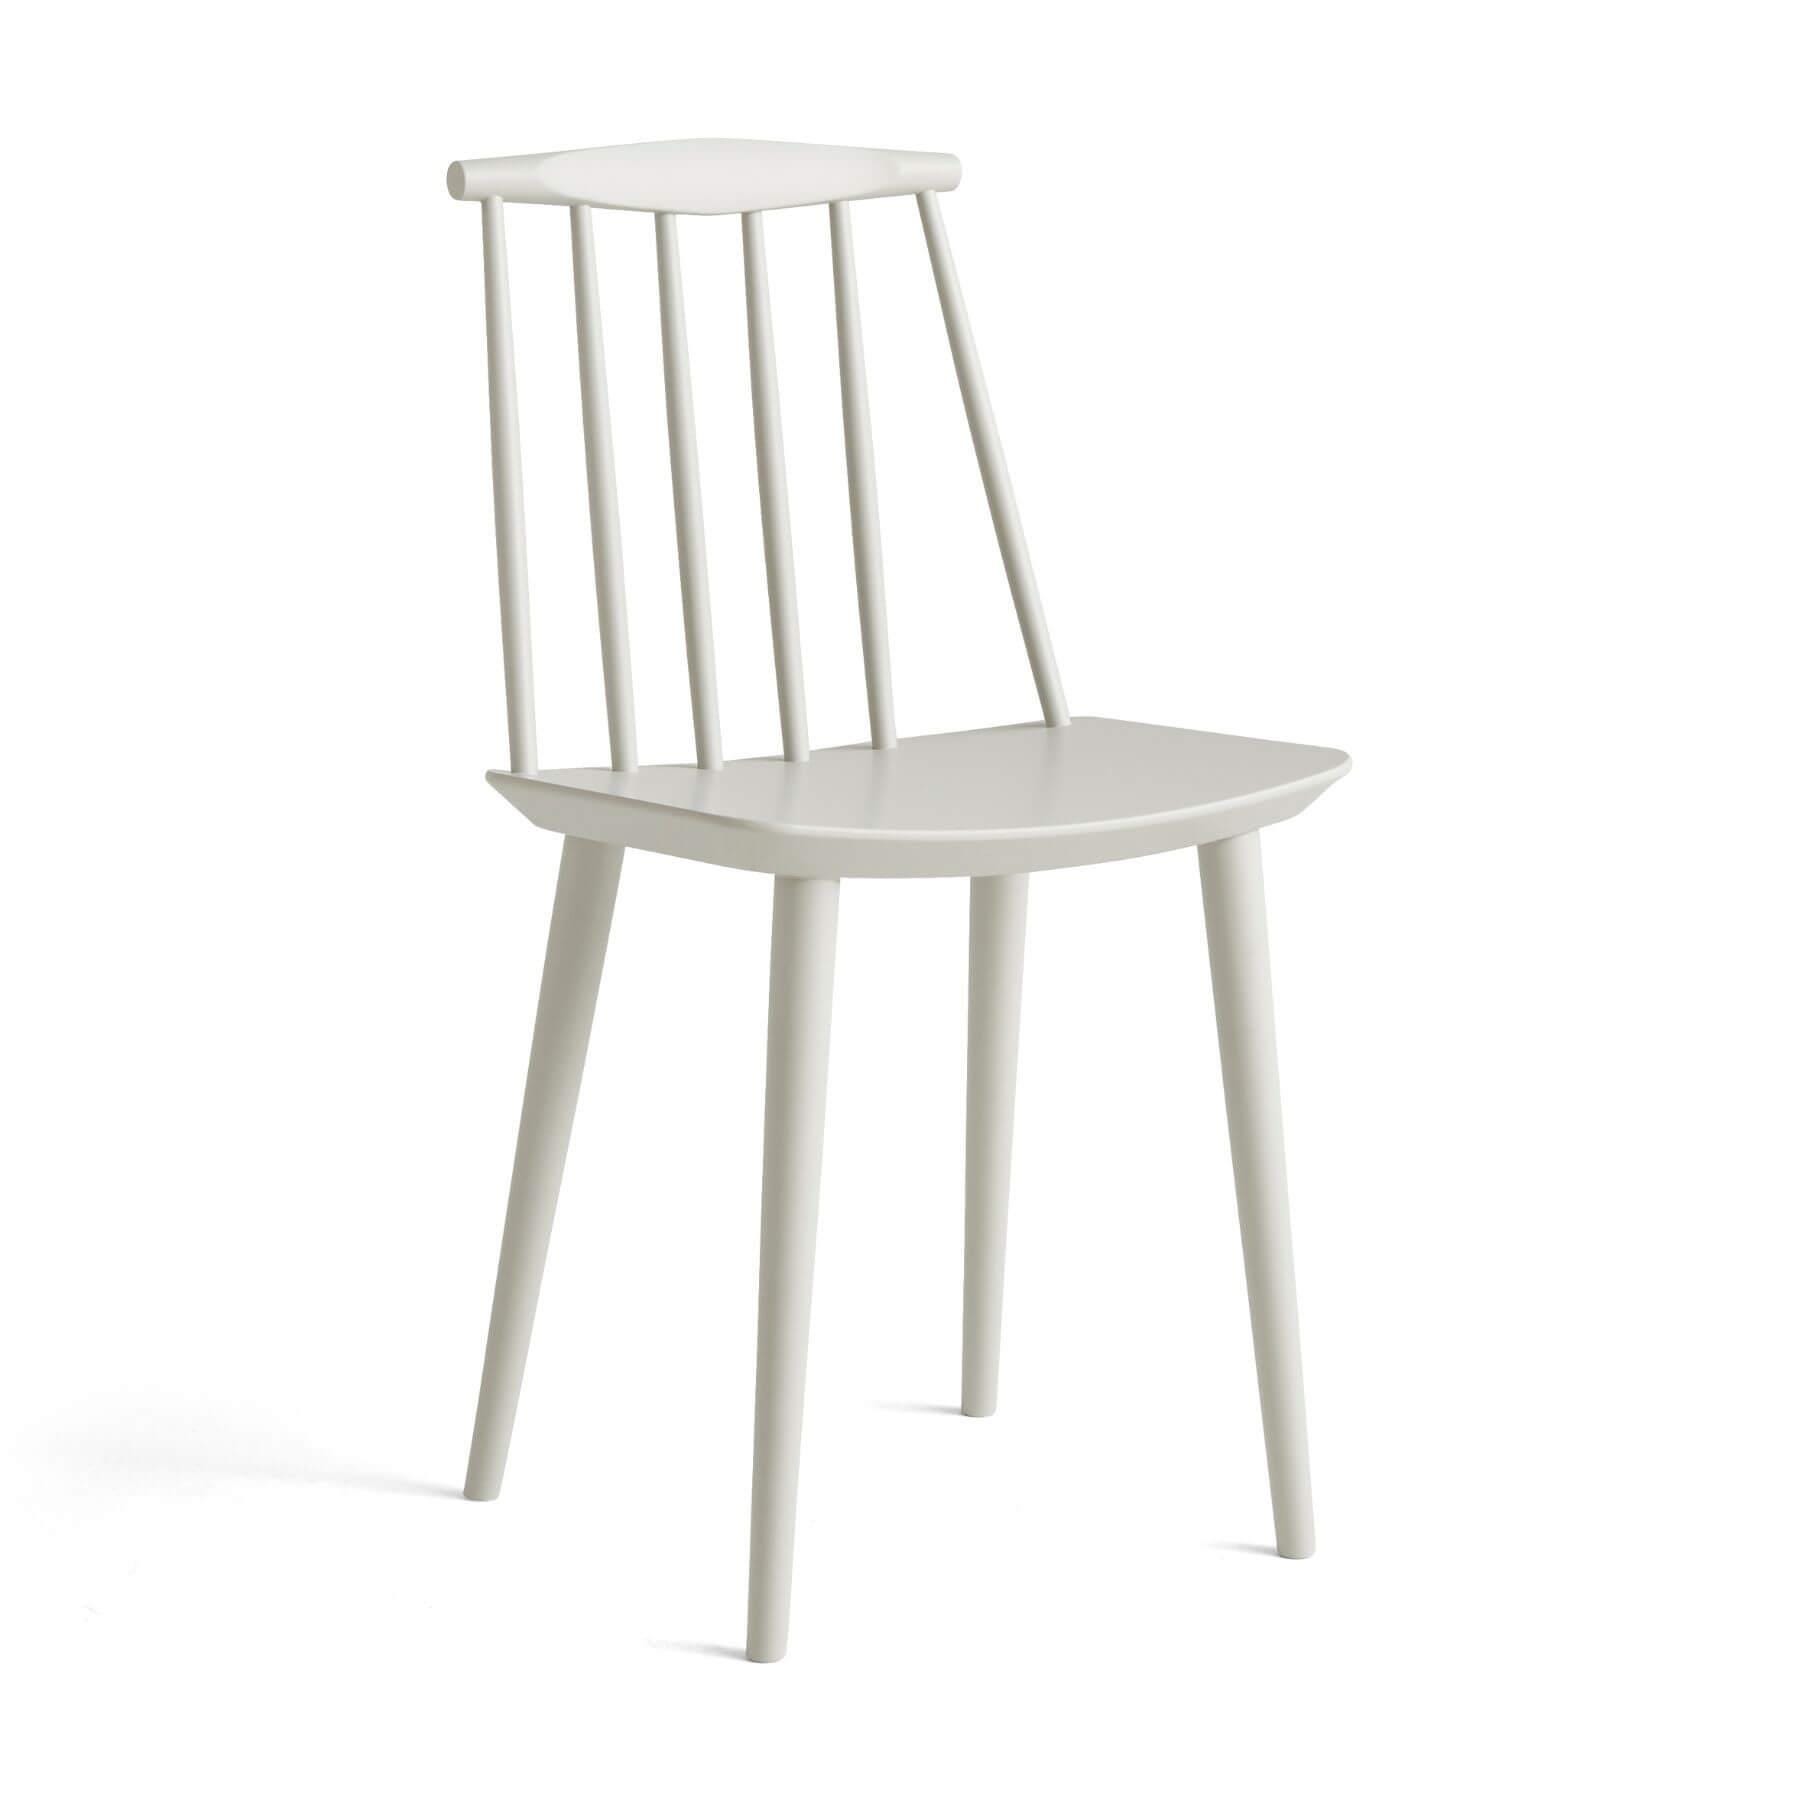 Hay Jseries 77 Dining Chair Beech Lacquered Grey Felt Gliders Green Designer Furniture From Holloways Of Ludlow